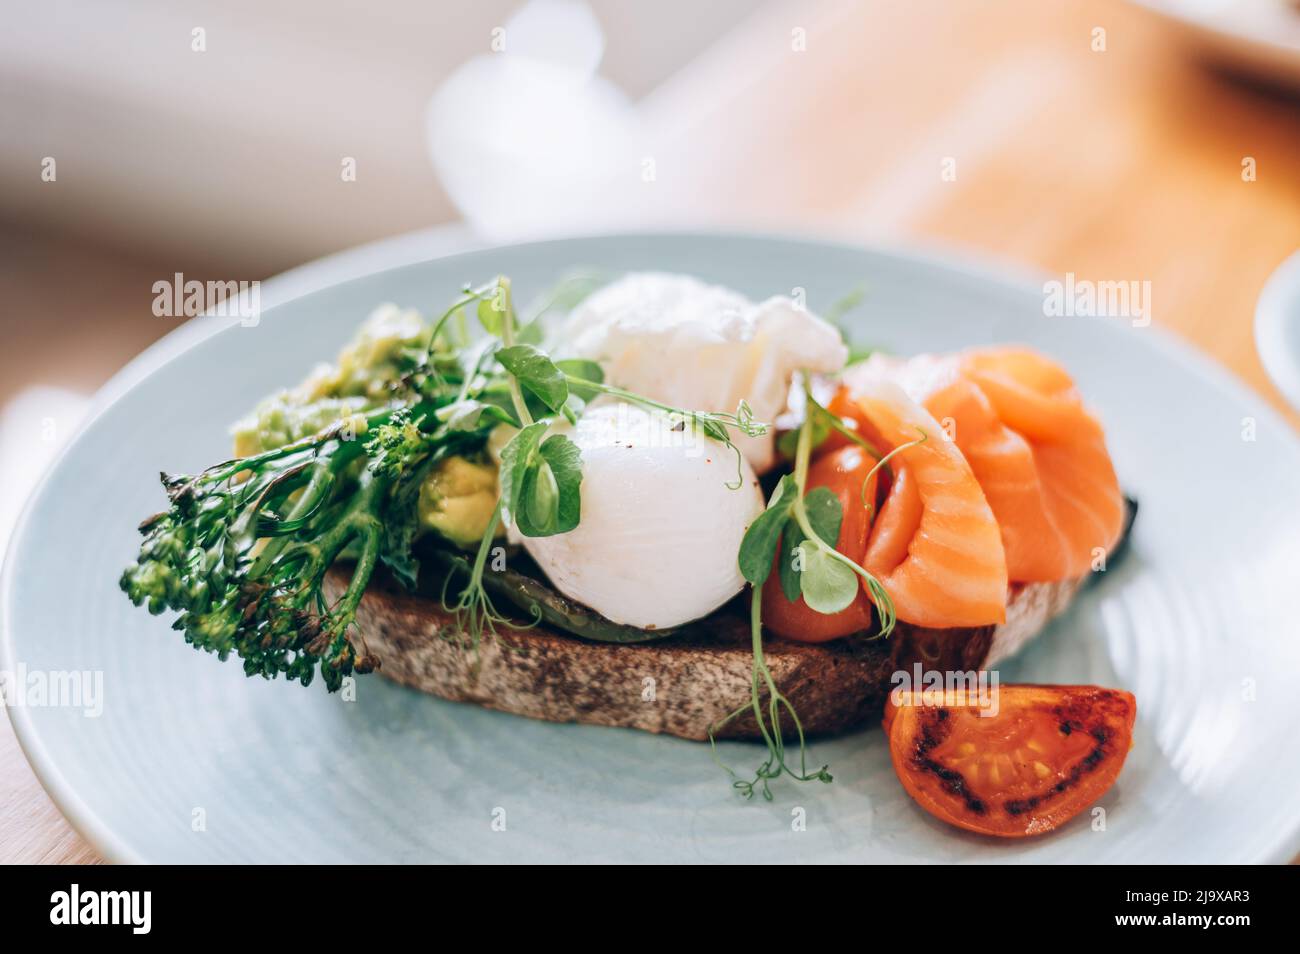 Healthy breakfast from poached eggs and veggies Stock Photo